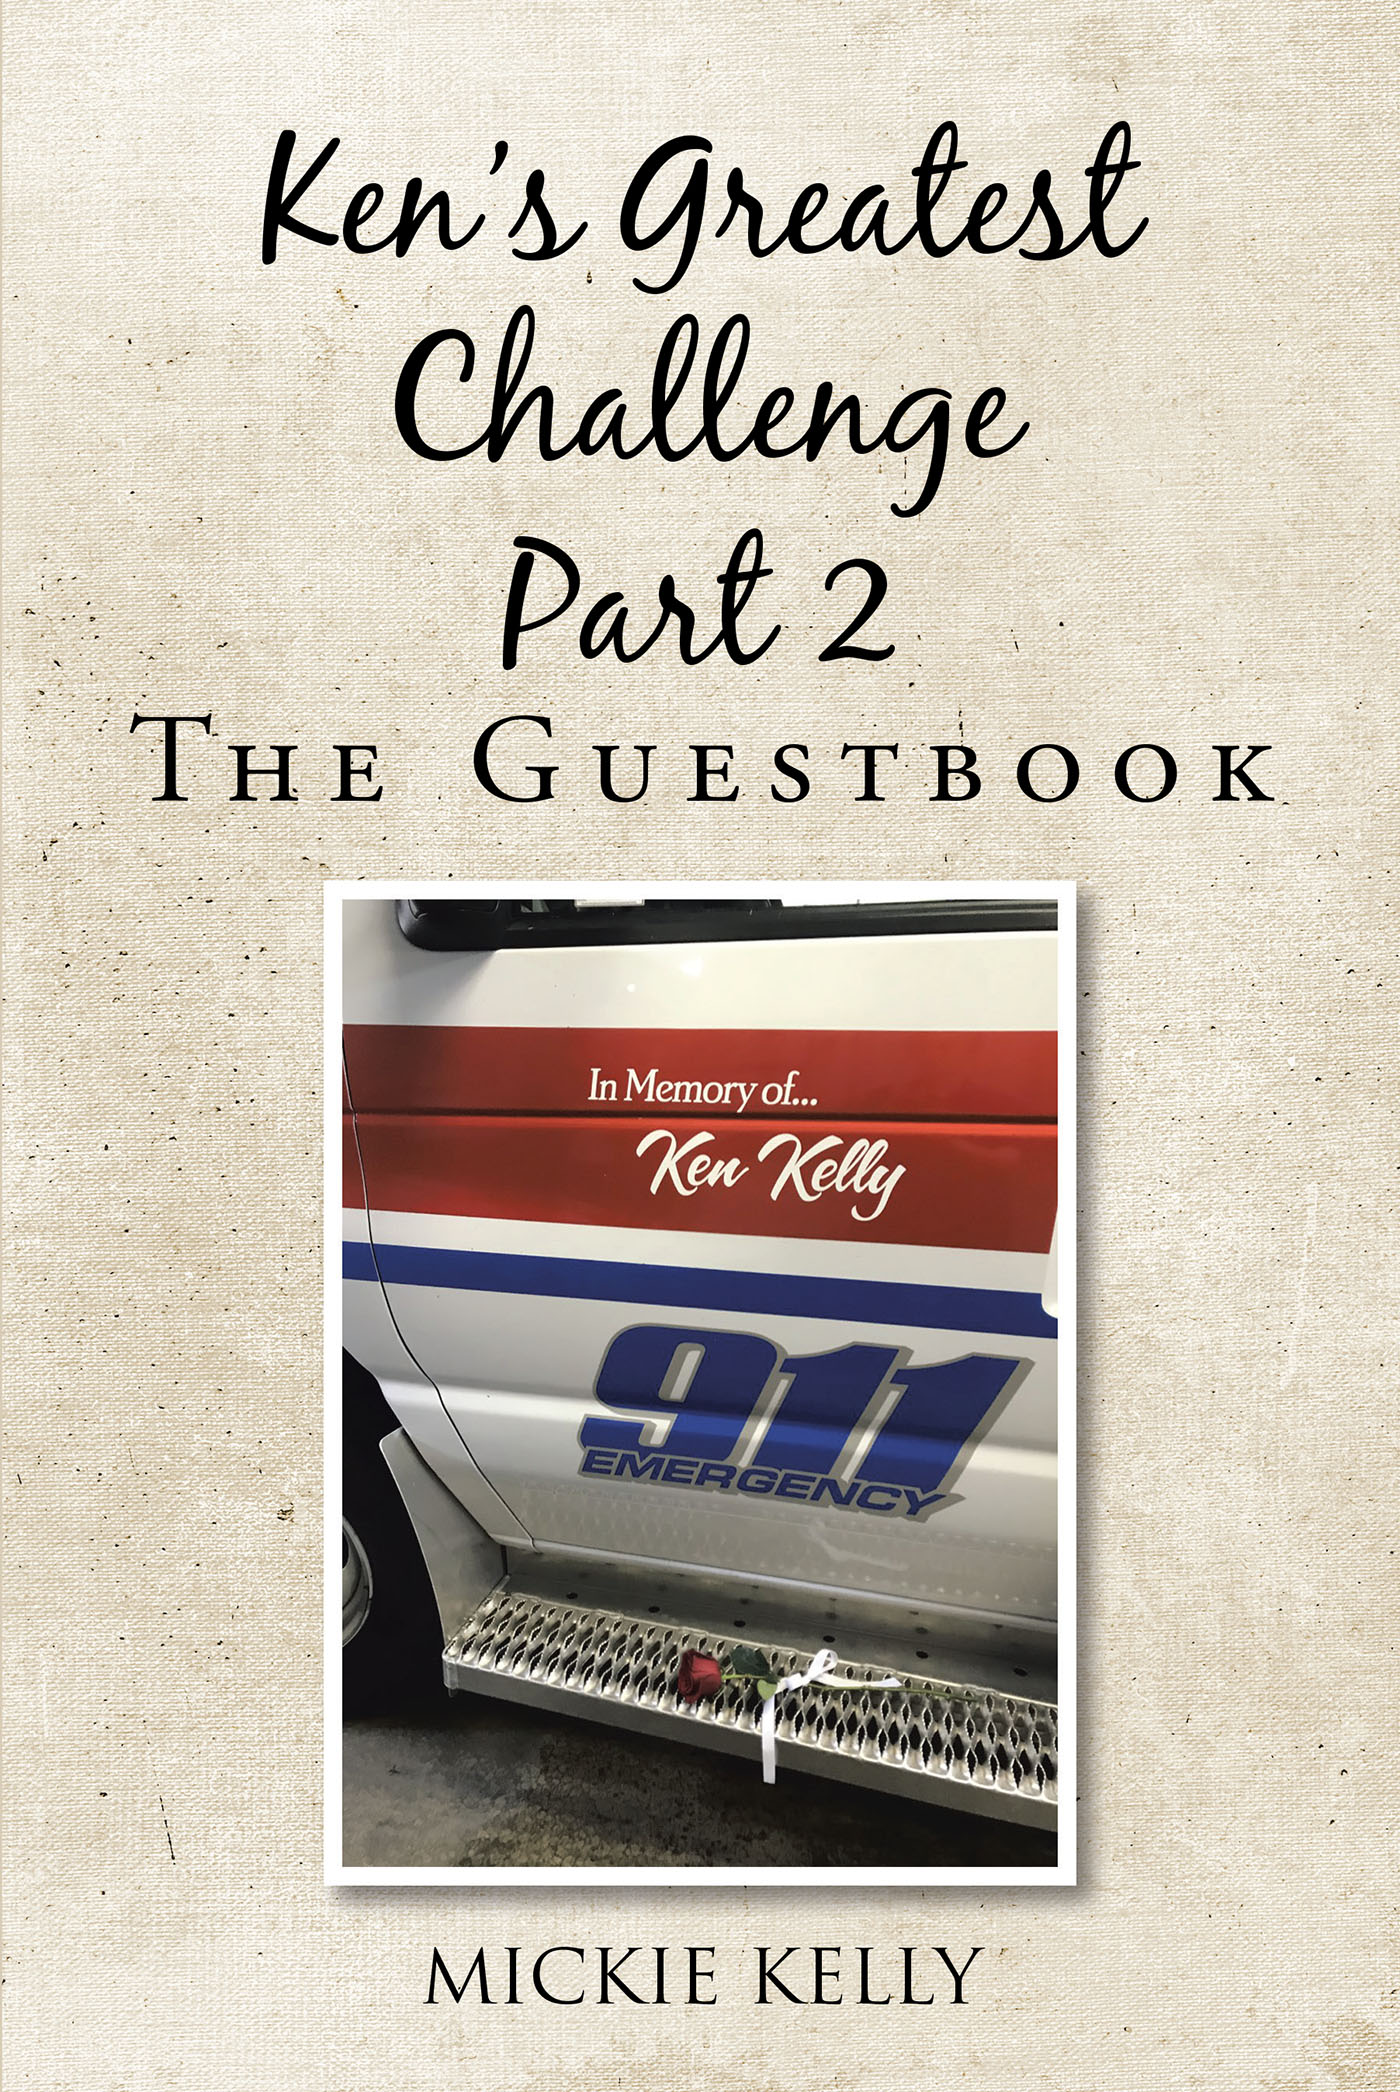 Mickie Kelly’s Newly Released "Ken’s Greatest Challenge Part 2: The Guestbook" is a Touching Collection of Words of Encouragement Delivered During a Time of Need